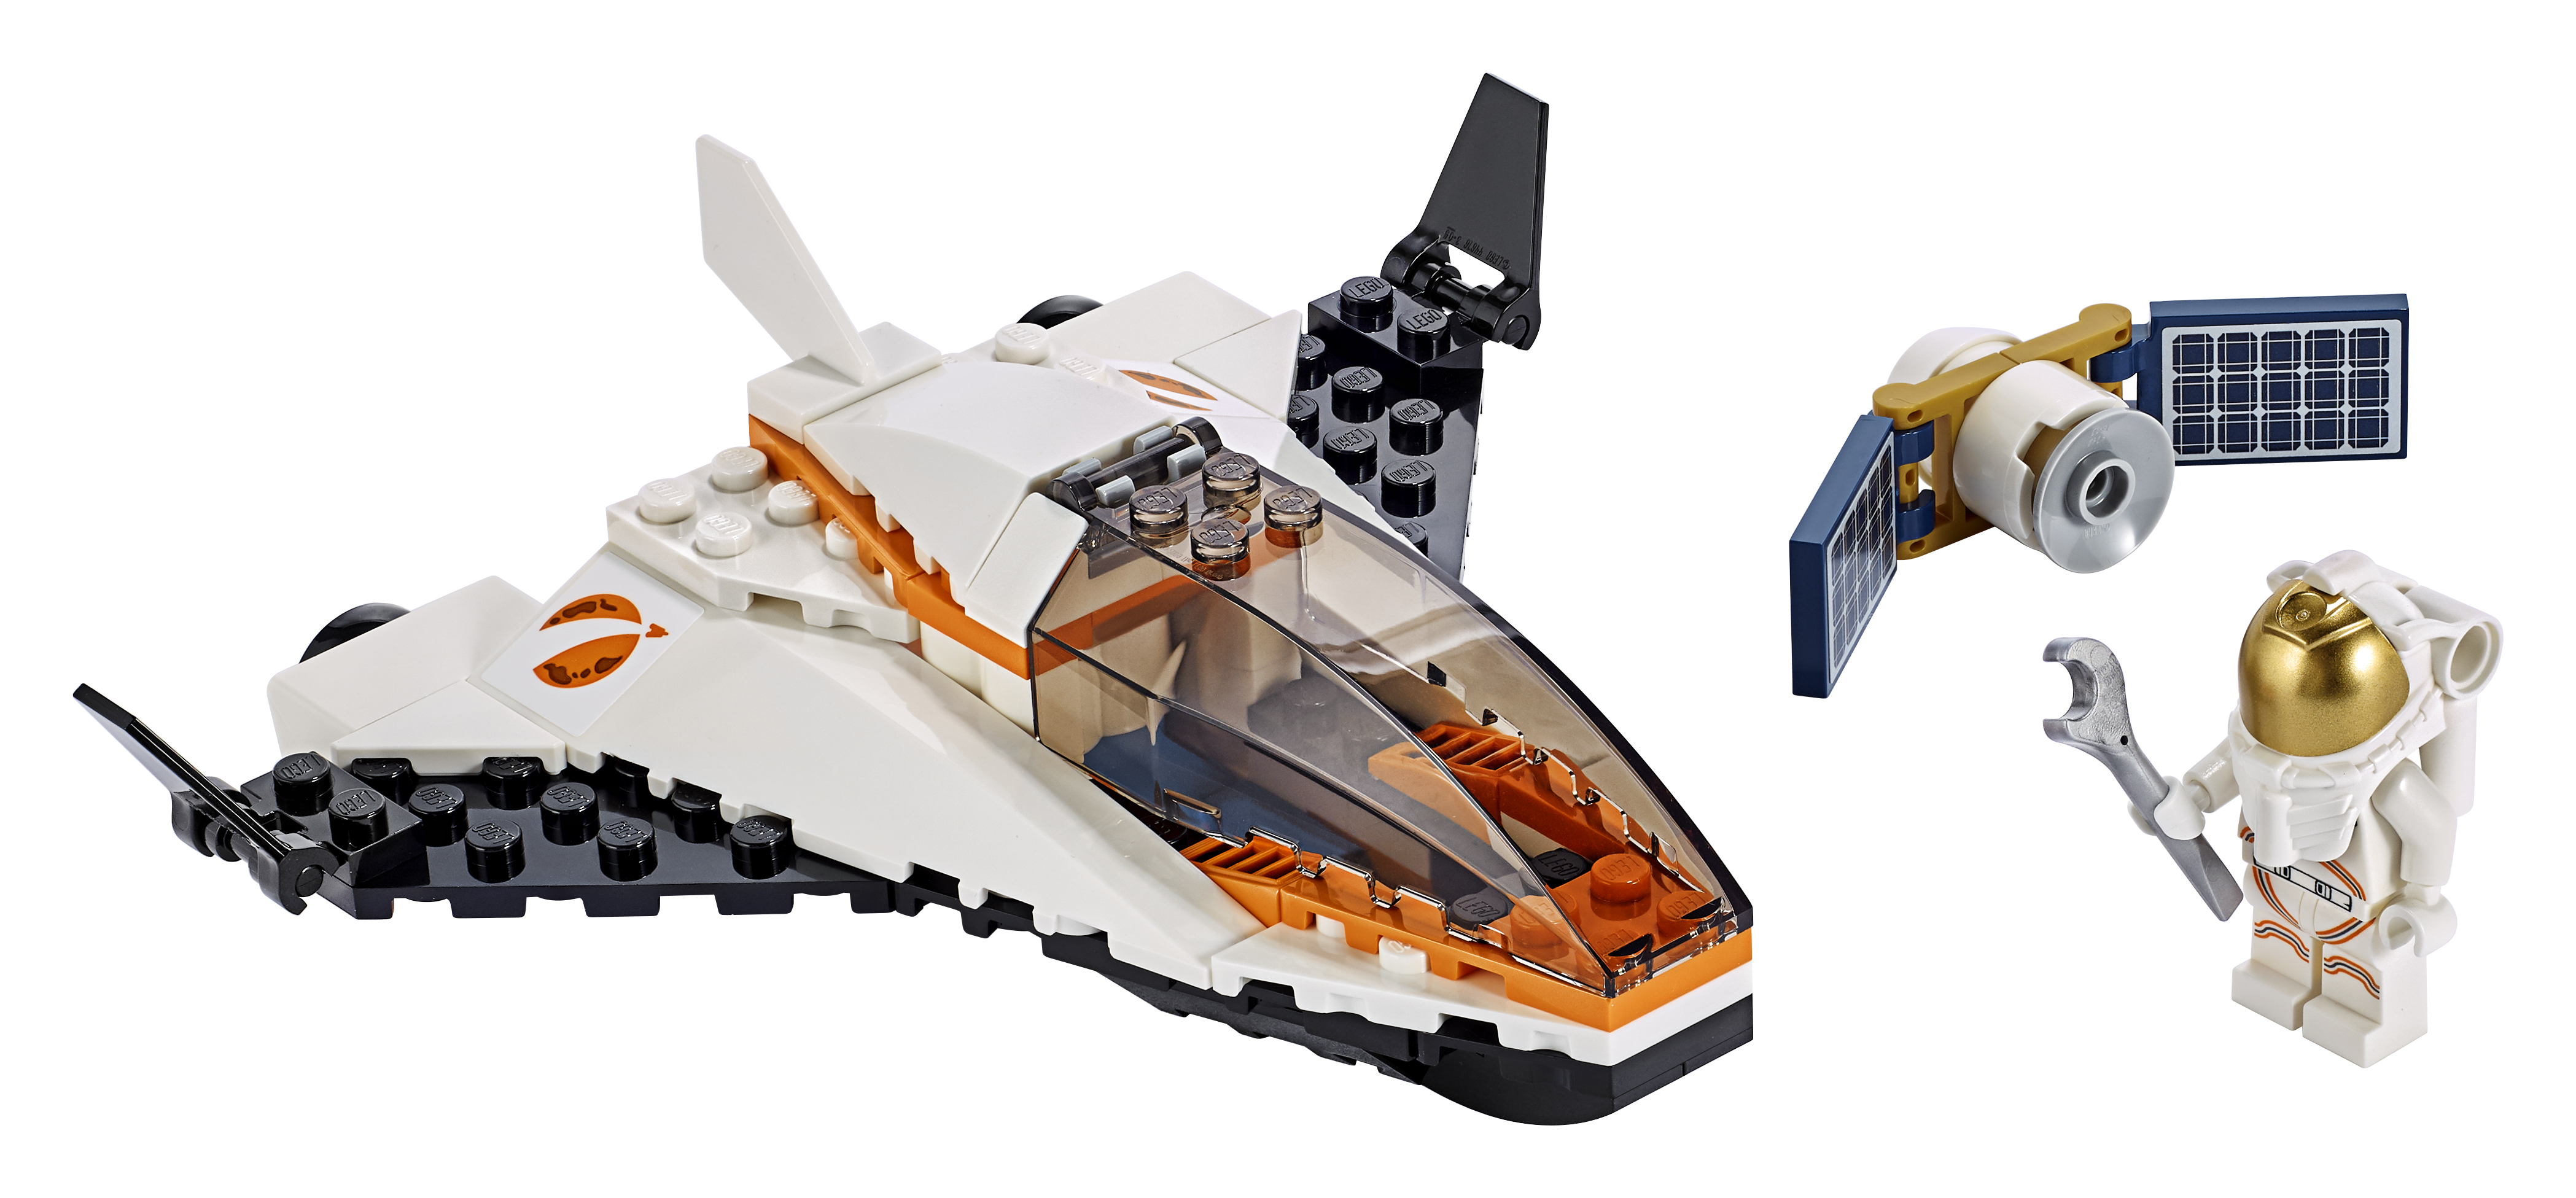 LEGO City Space Satellite Service Mission 60224 Space Shuttle Toy (84 Pieces) - image 4 of 8